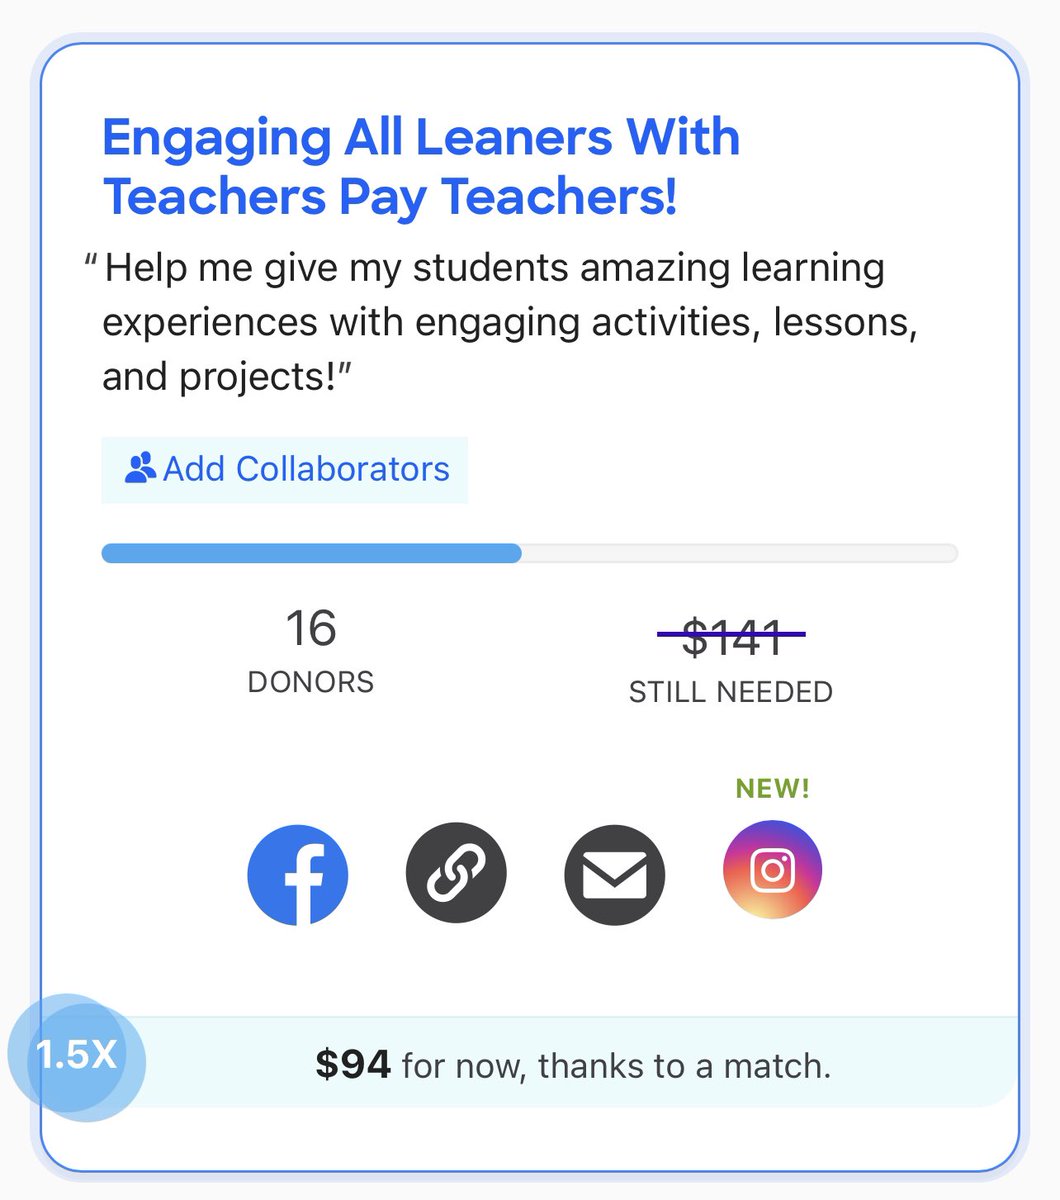 Whoop whoop @DonorsChoose is back at it again with a x 1.5 match! Let’s help each other out! I only need $94 to find my project! This one expires on 8/20! What do you need? Drop below and retreat to help each other! tinyurl.com/TPTlearningfun